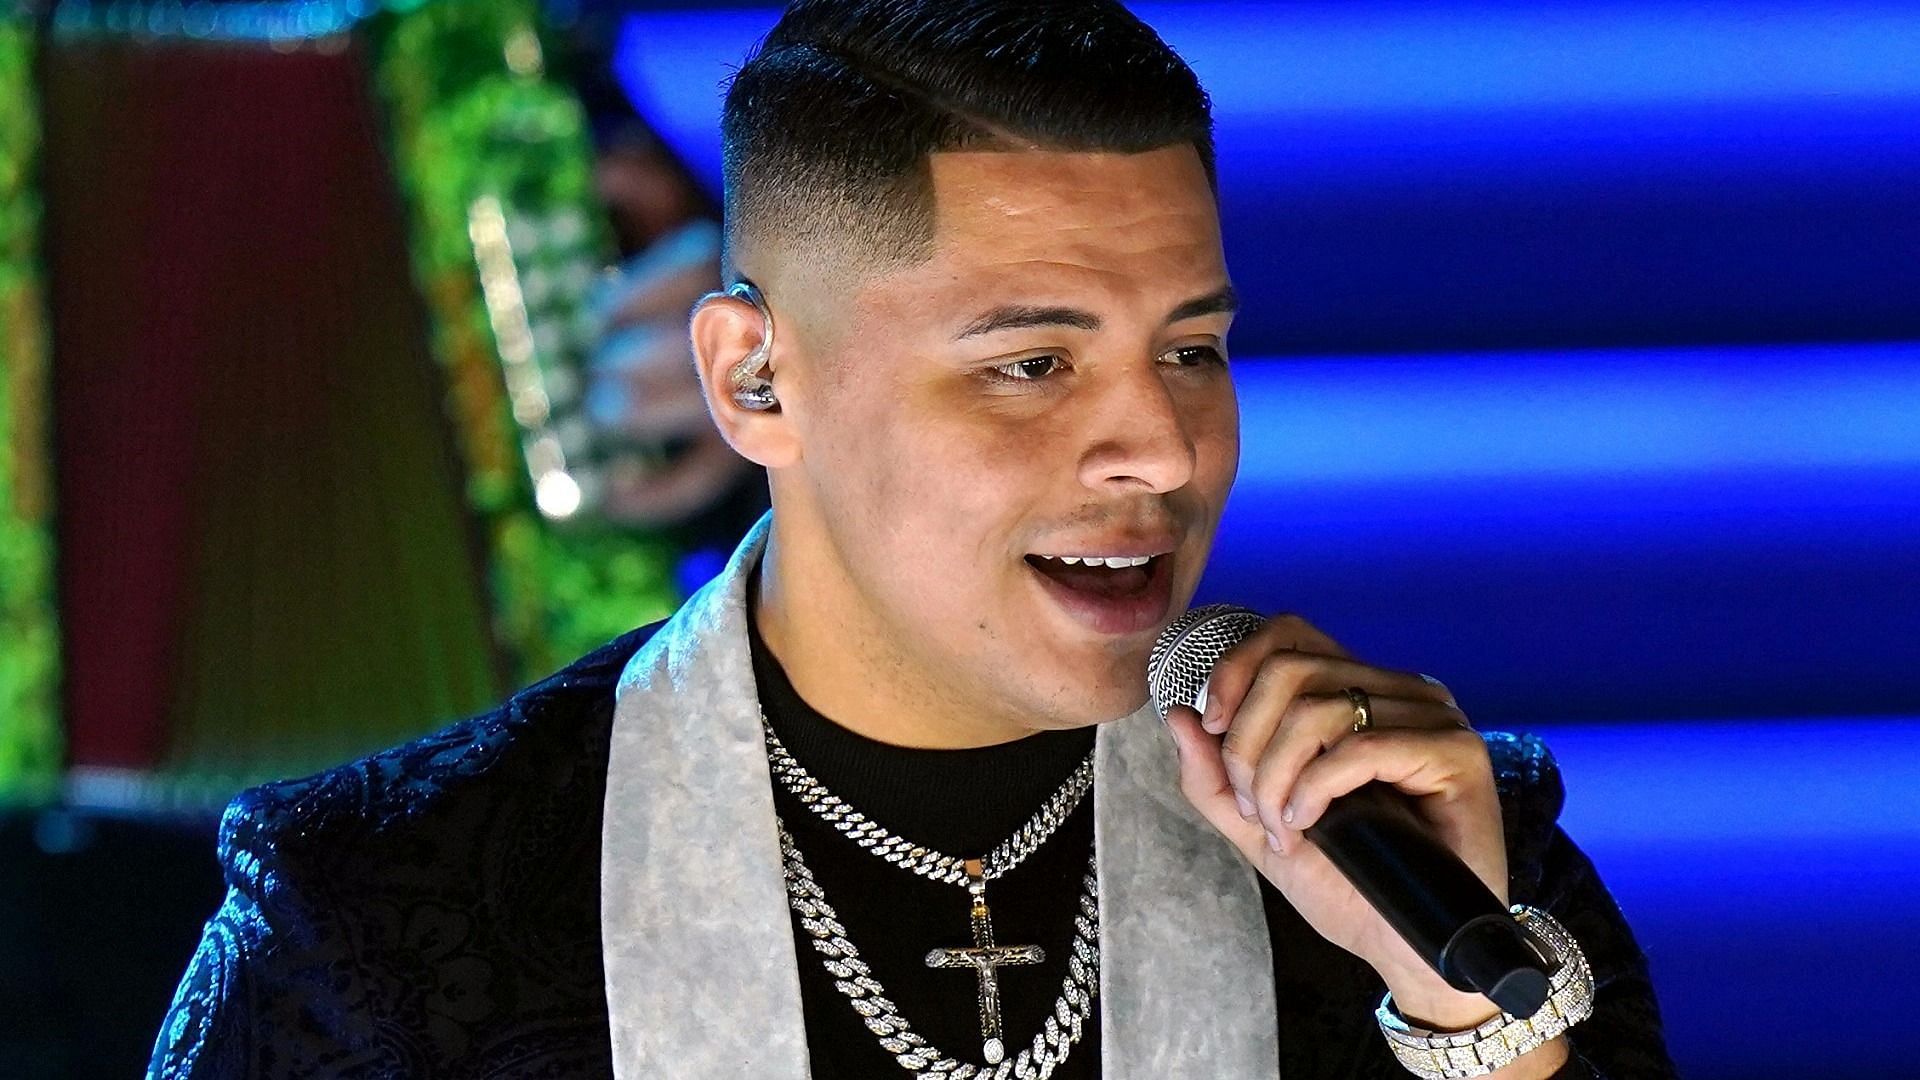 Eduin Caz suffered from a chronic hernia condition after his concert in Mexico City on May 7. (Image via Getty Images/Rodrigo Varela)